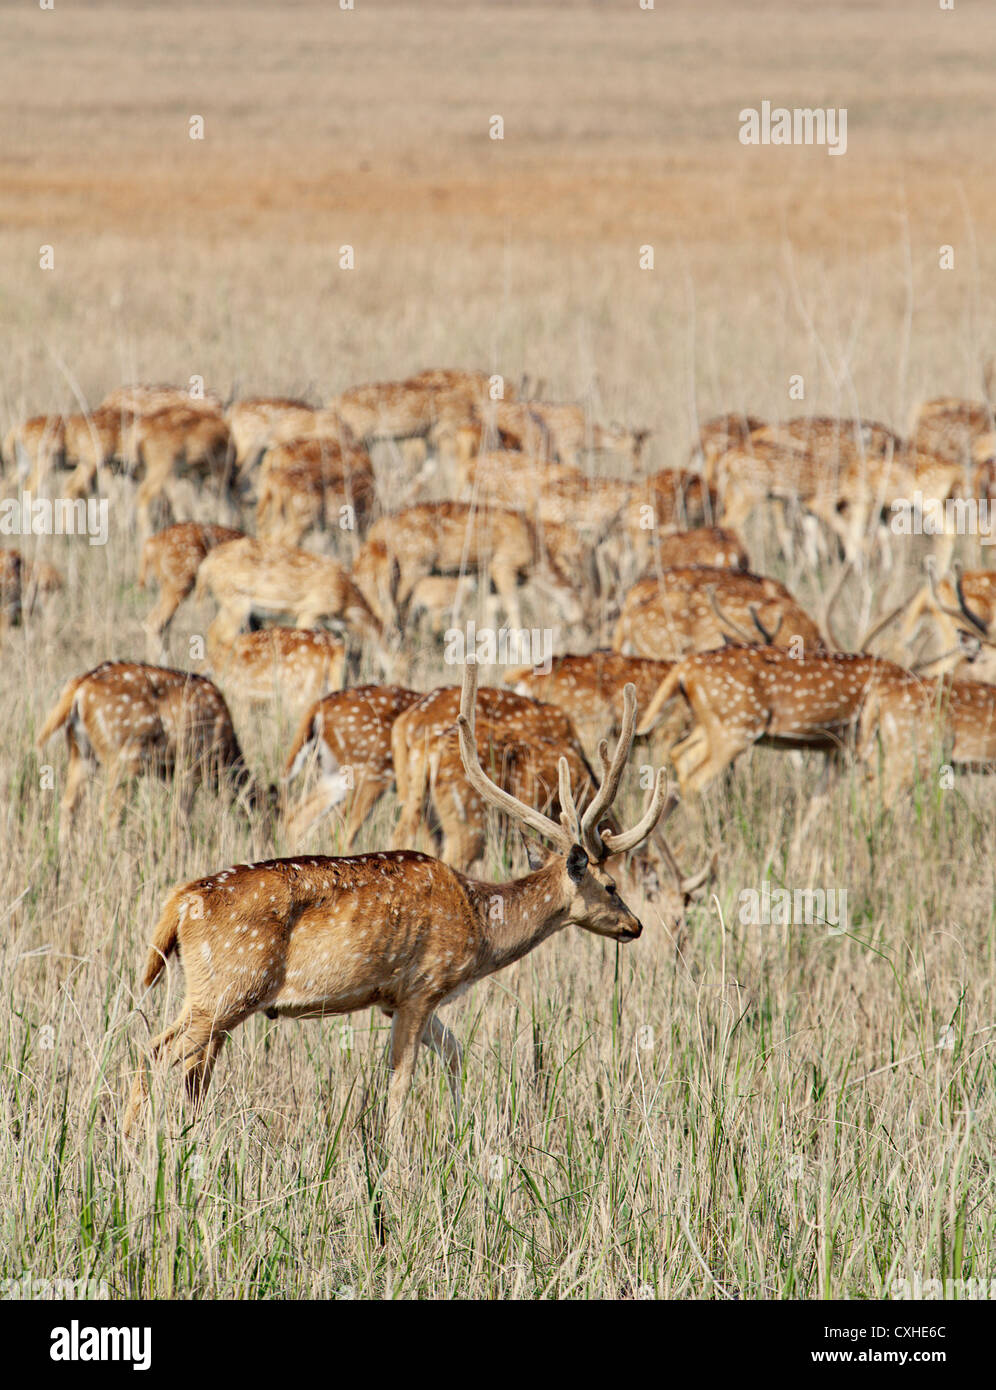 Spotted deers (chital, or axis axis) in Dhikala area in Jim Corbett Tiger Reserve, India. Stock Photo